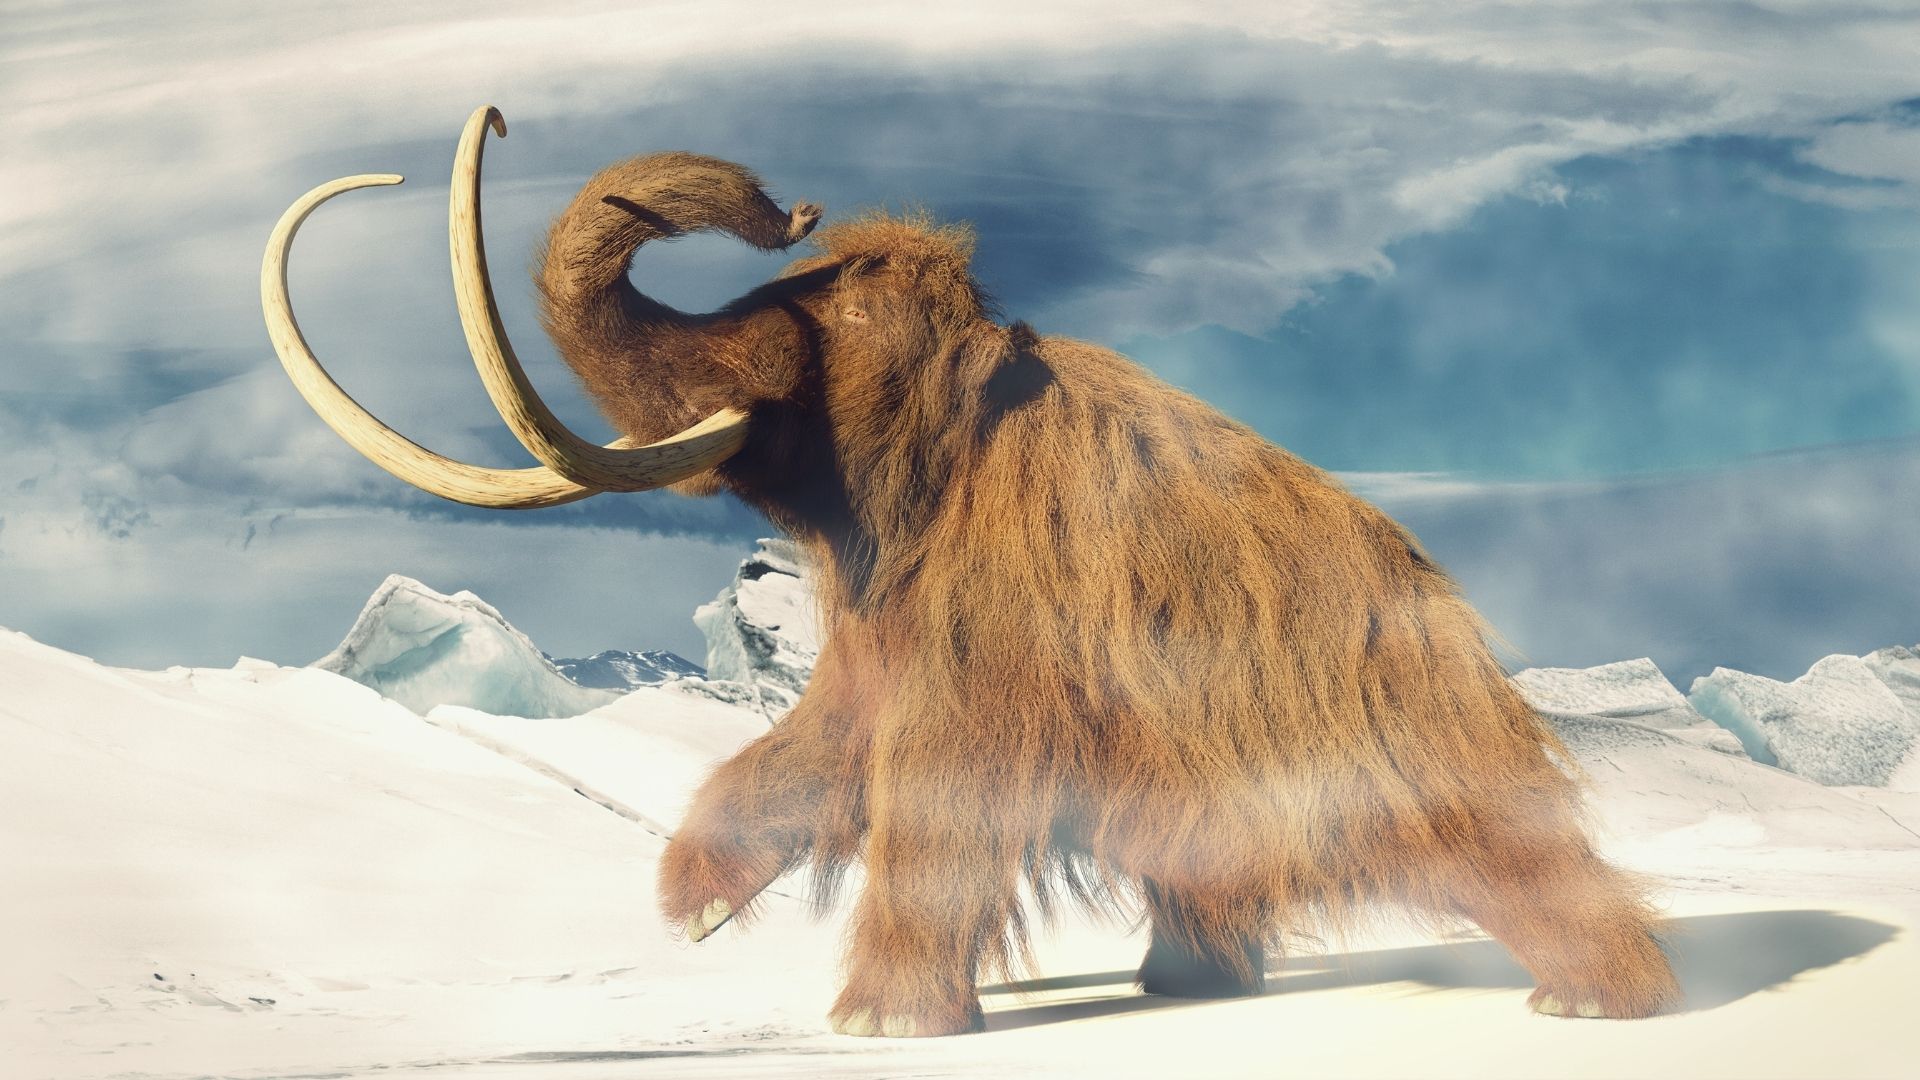 A Short Introduction to the Ice Age